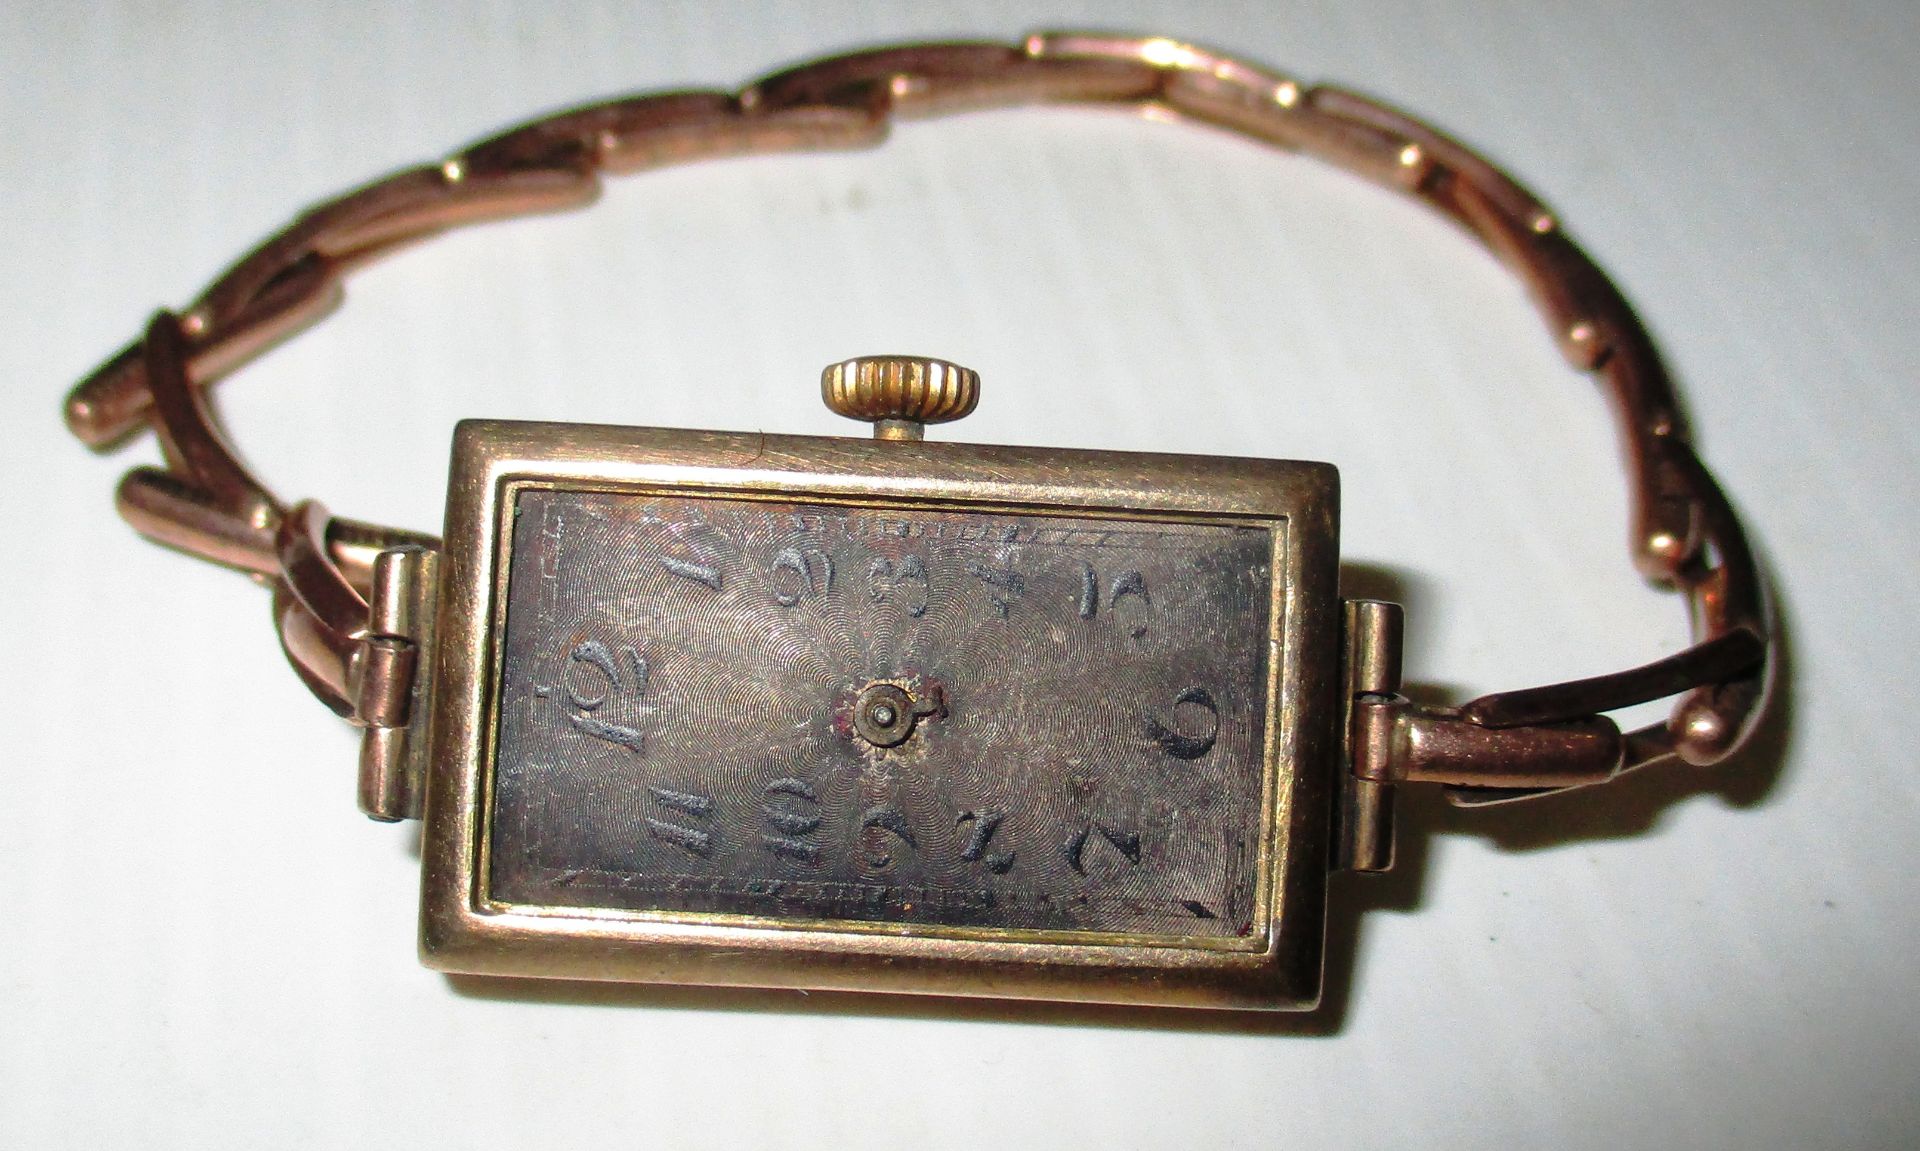 A ladies wristwatch with 9ct gold case and 9ct gold expanding bracelet (watch as seen - no hands)